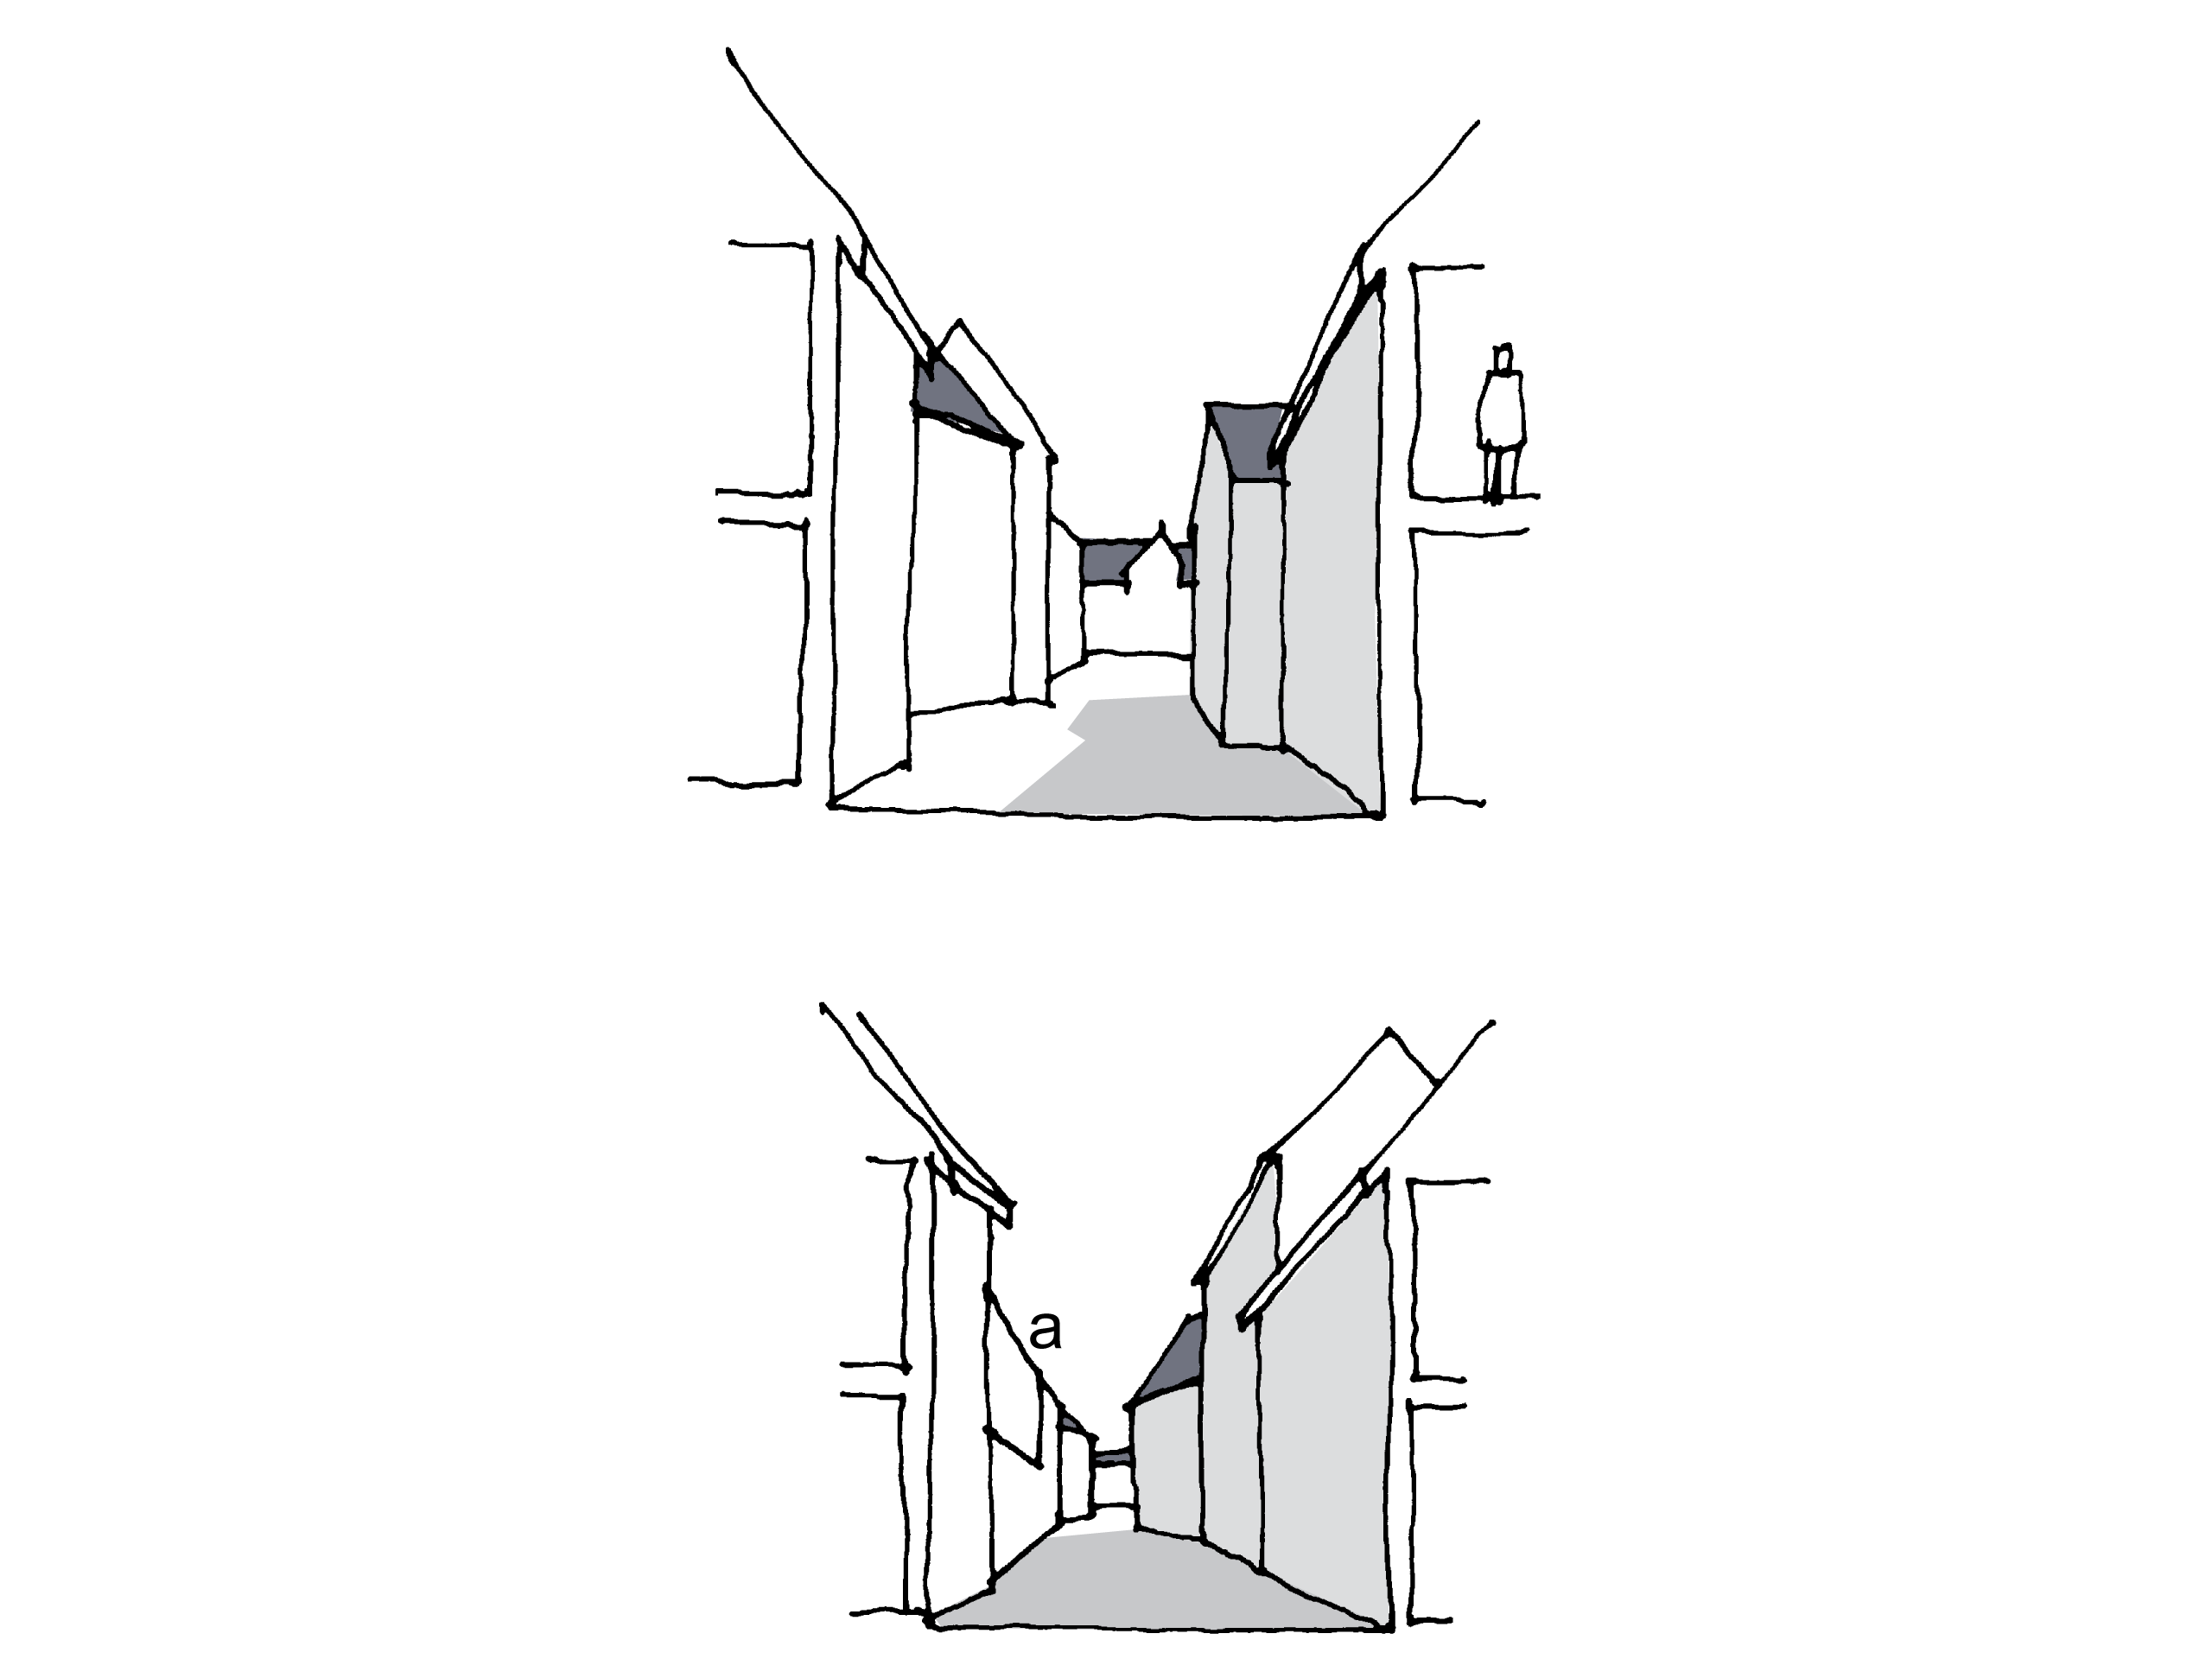 (Top)- Width of space equal to or less than height of enclosing planes. (Bottom) Drop in height at (a) compensated by rise in height on opposite side